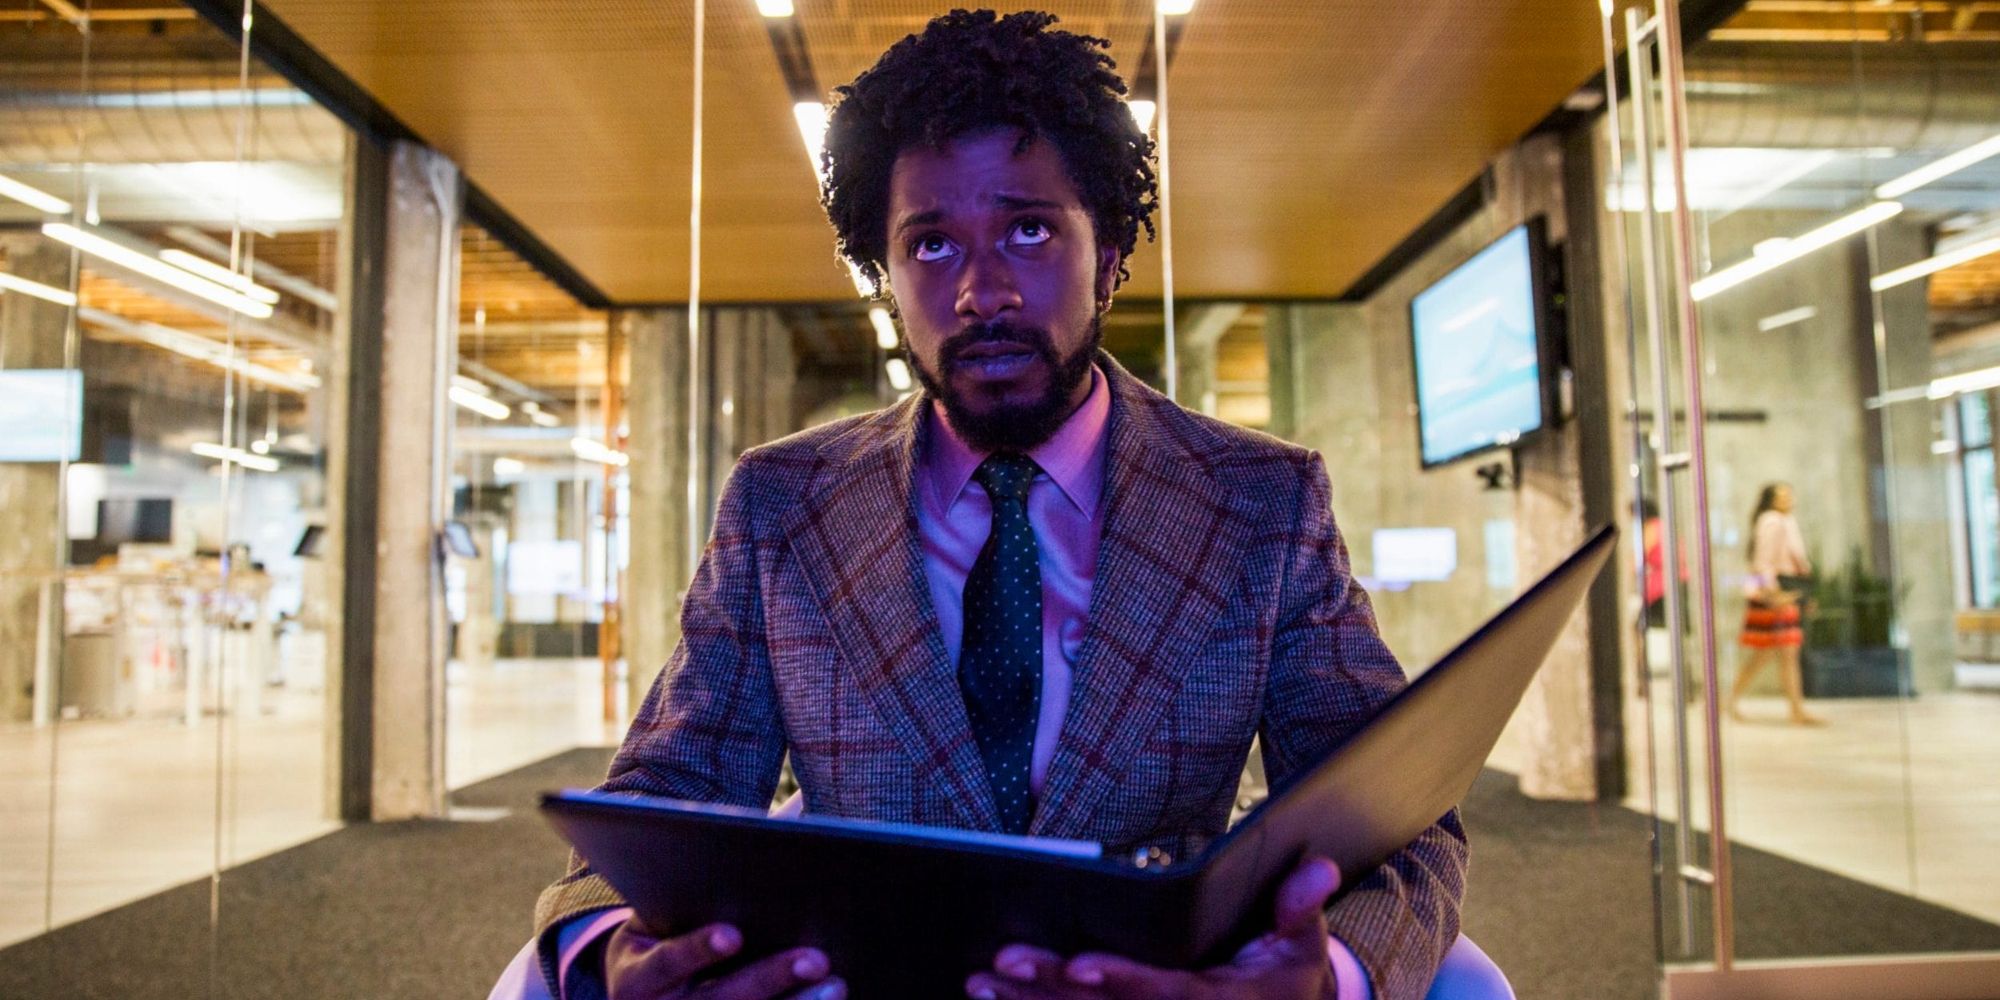 Cash looking up while holding an open book in Sorry To Bother You